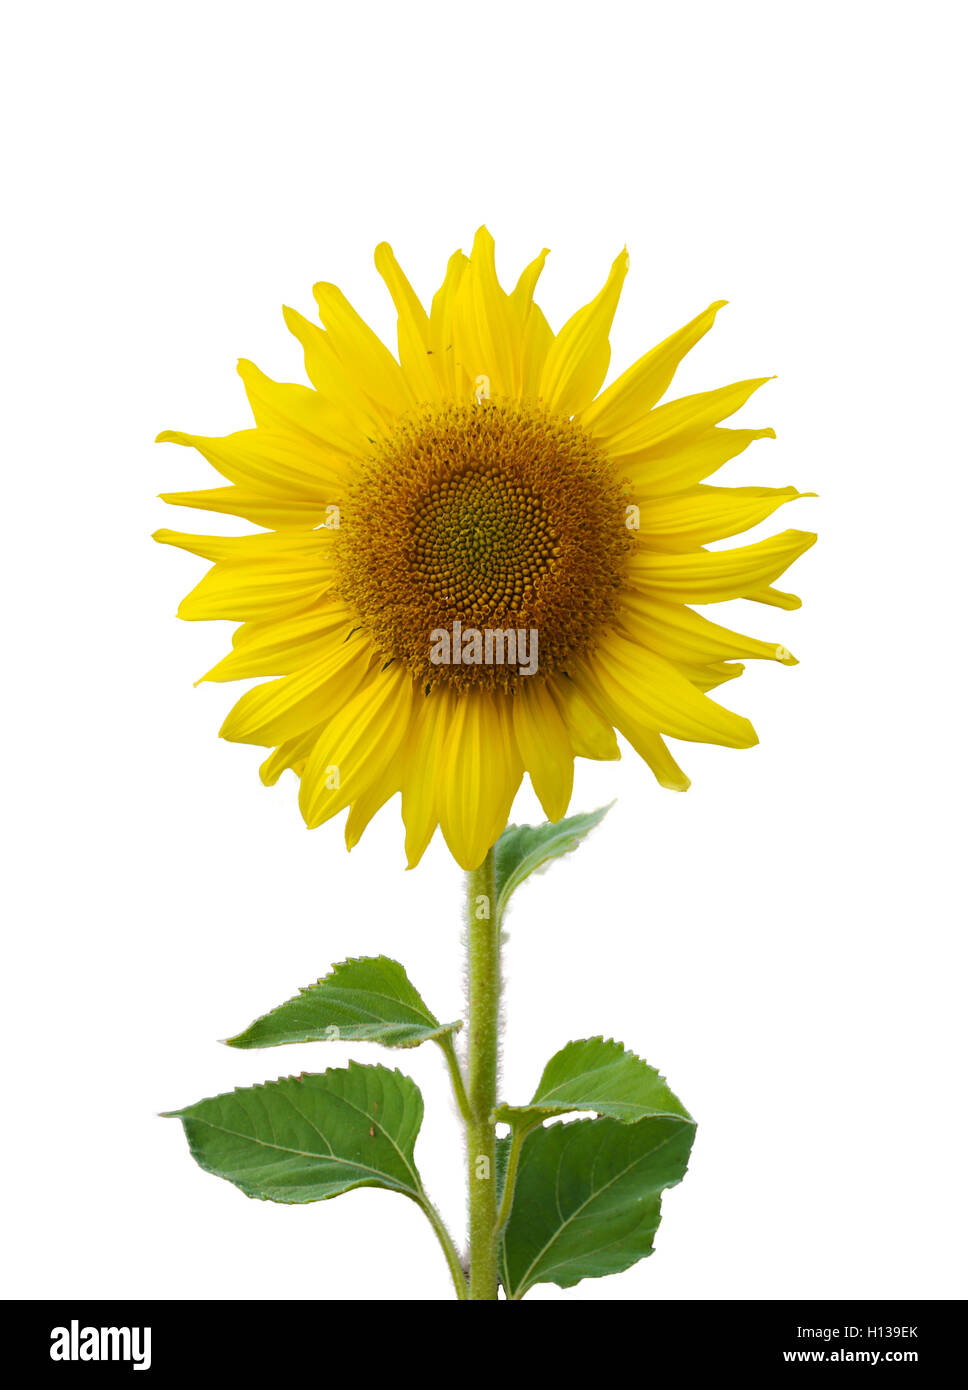 Sunflower blossoming isolate Stock Photo